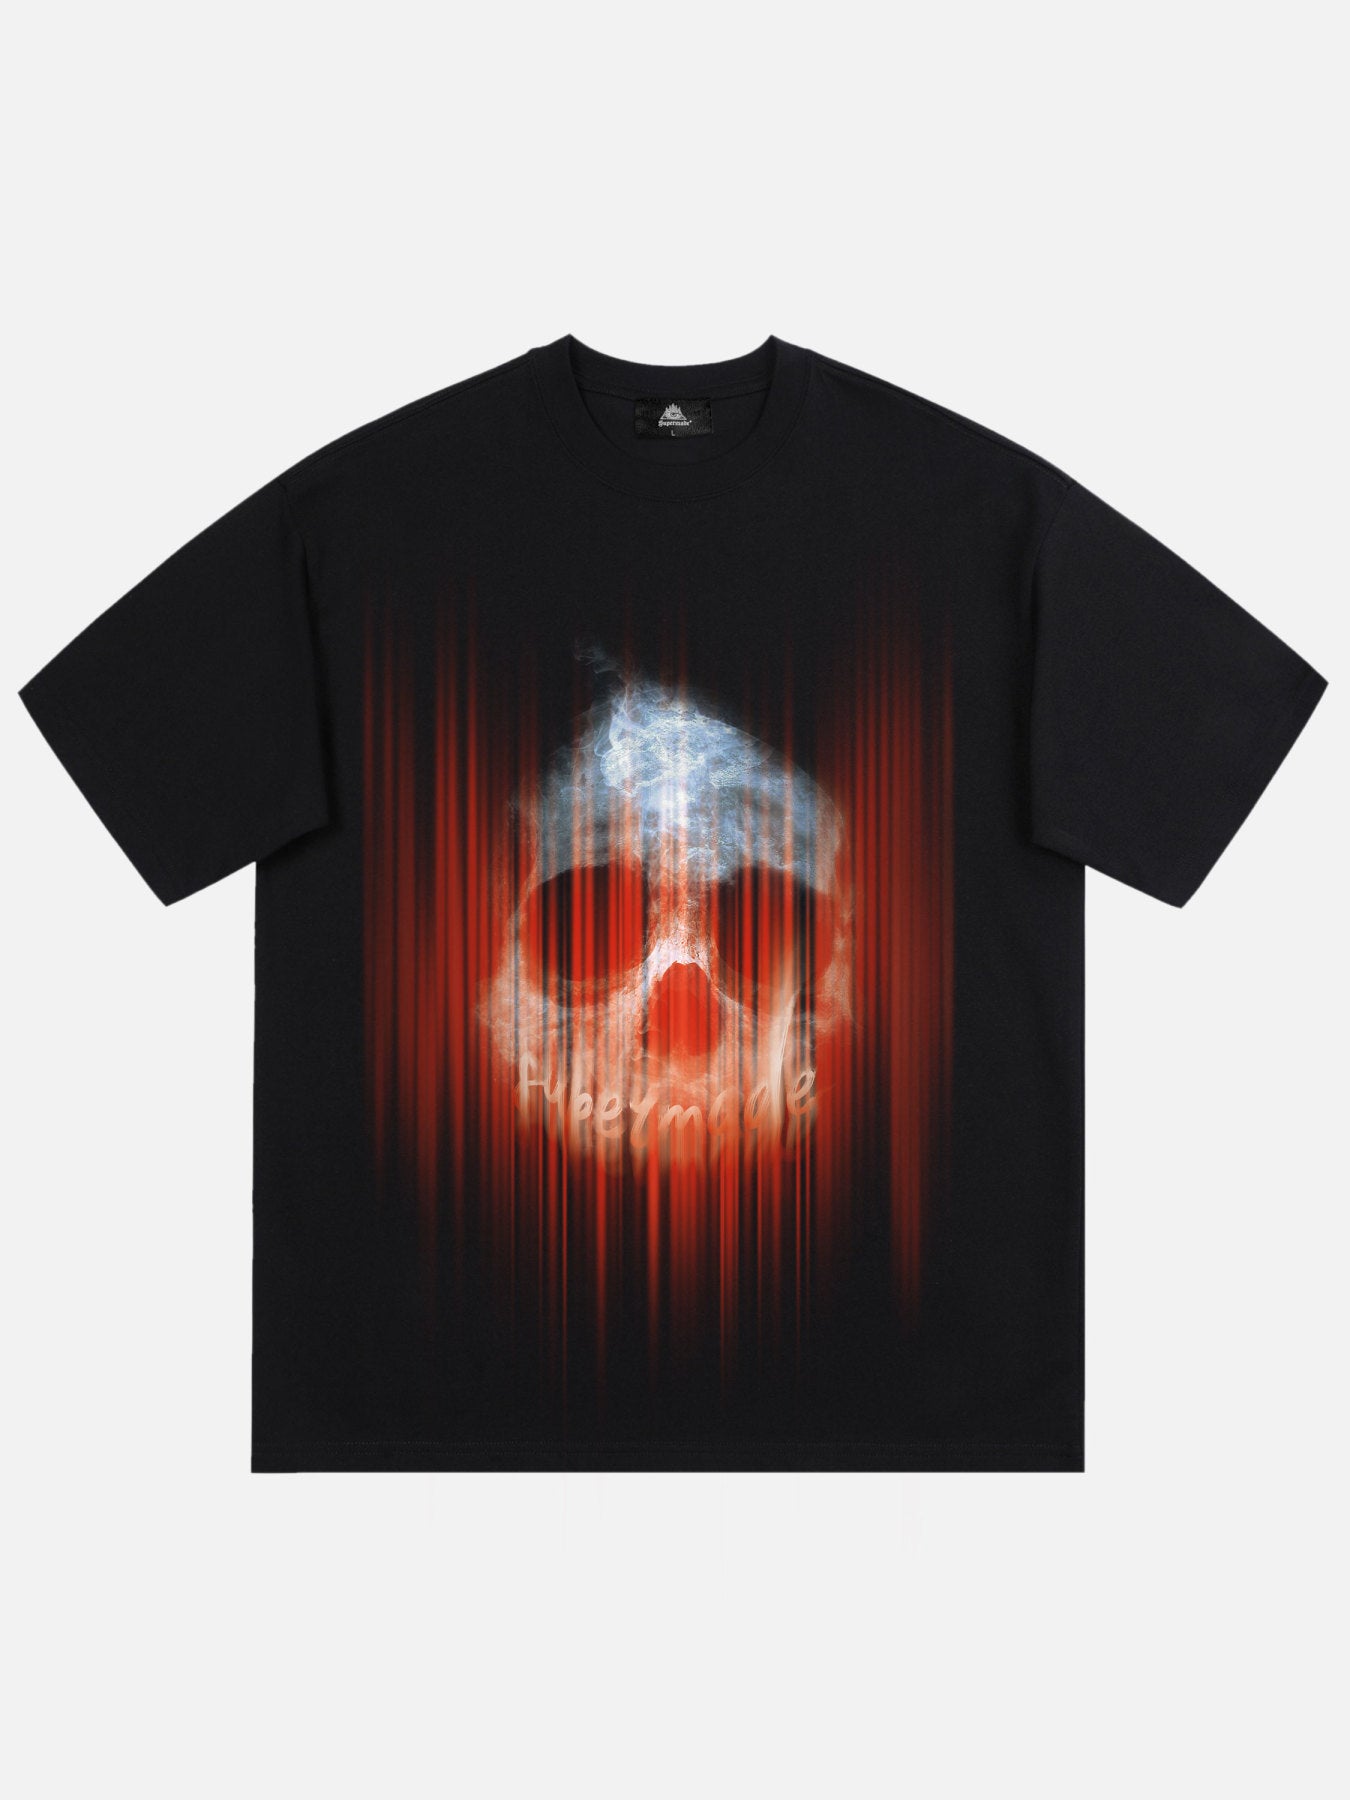 The Supermade Skull Glow Effect T-Shirt